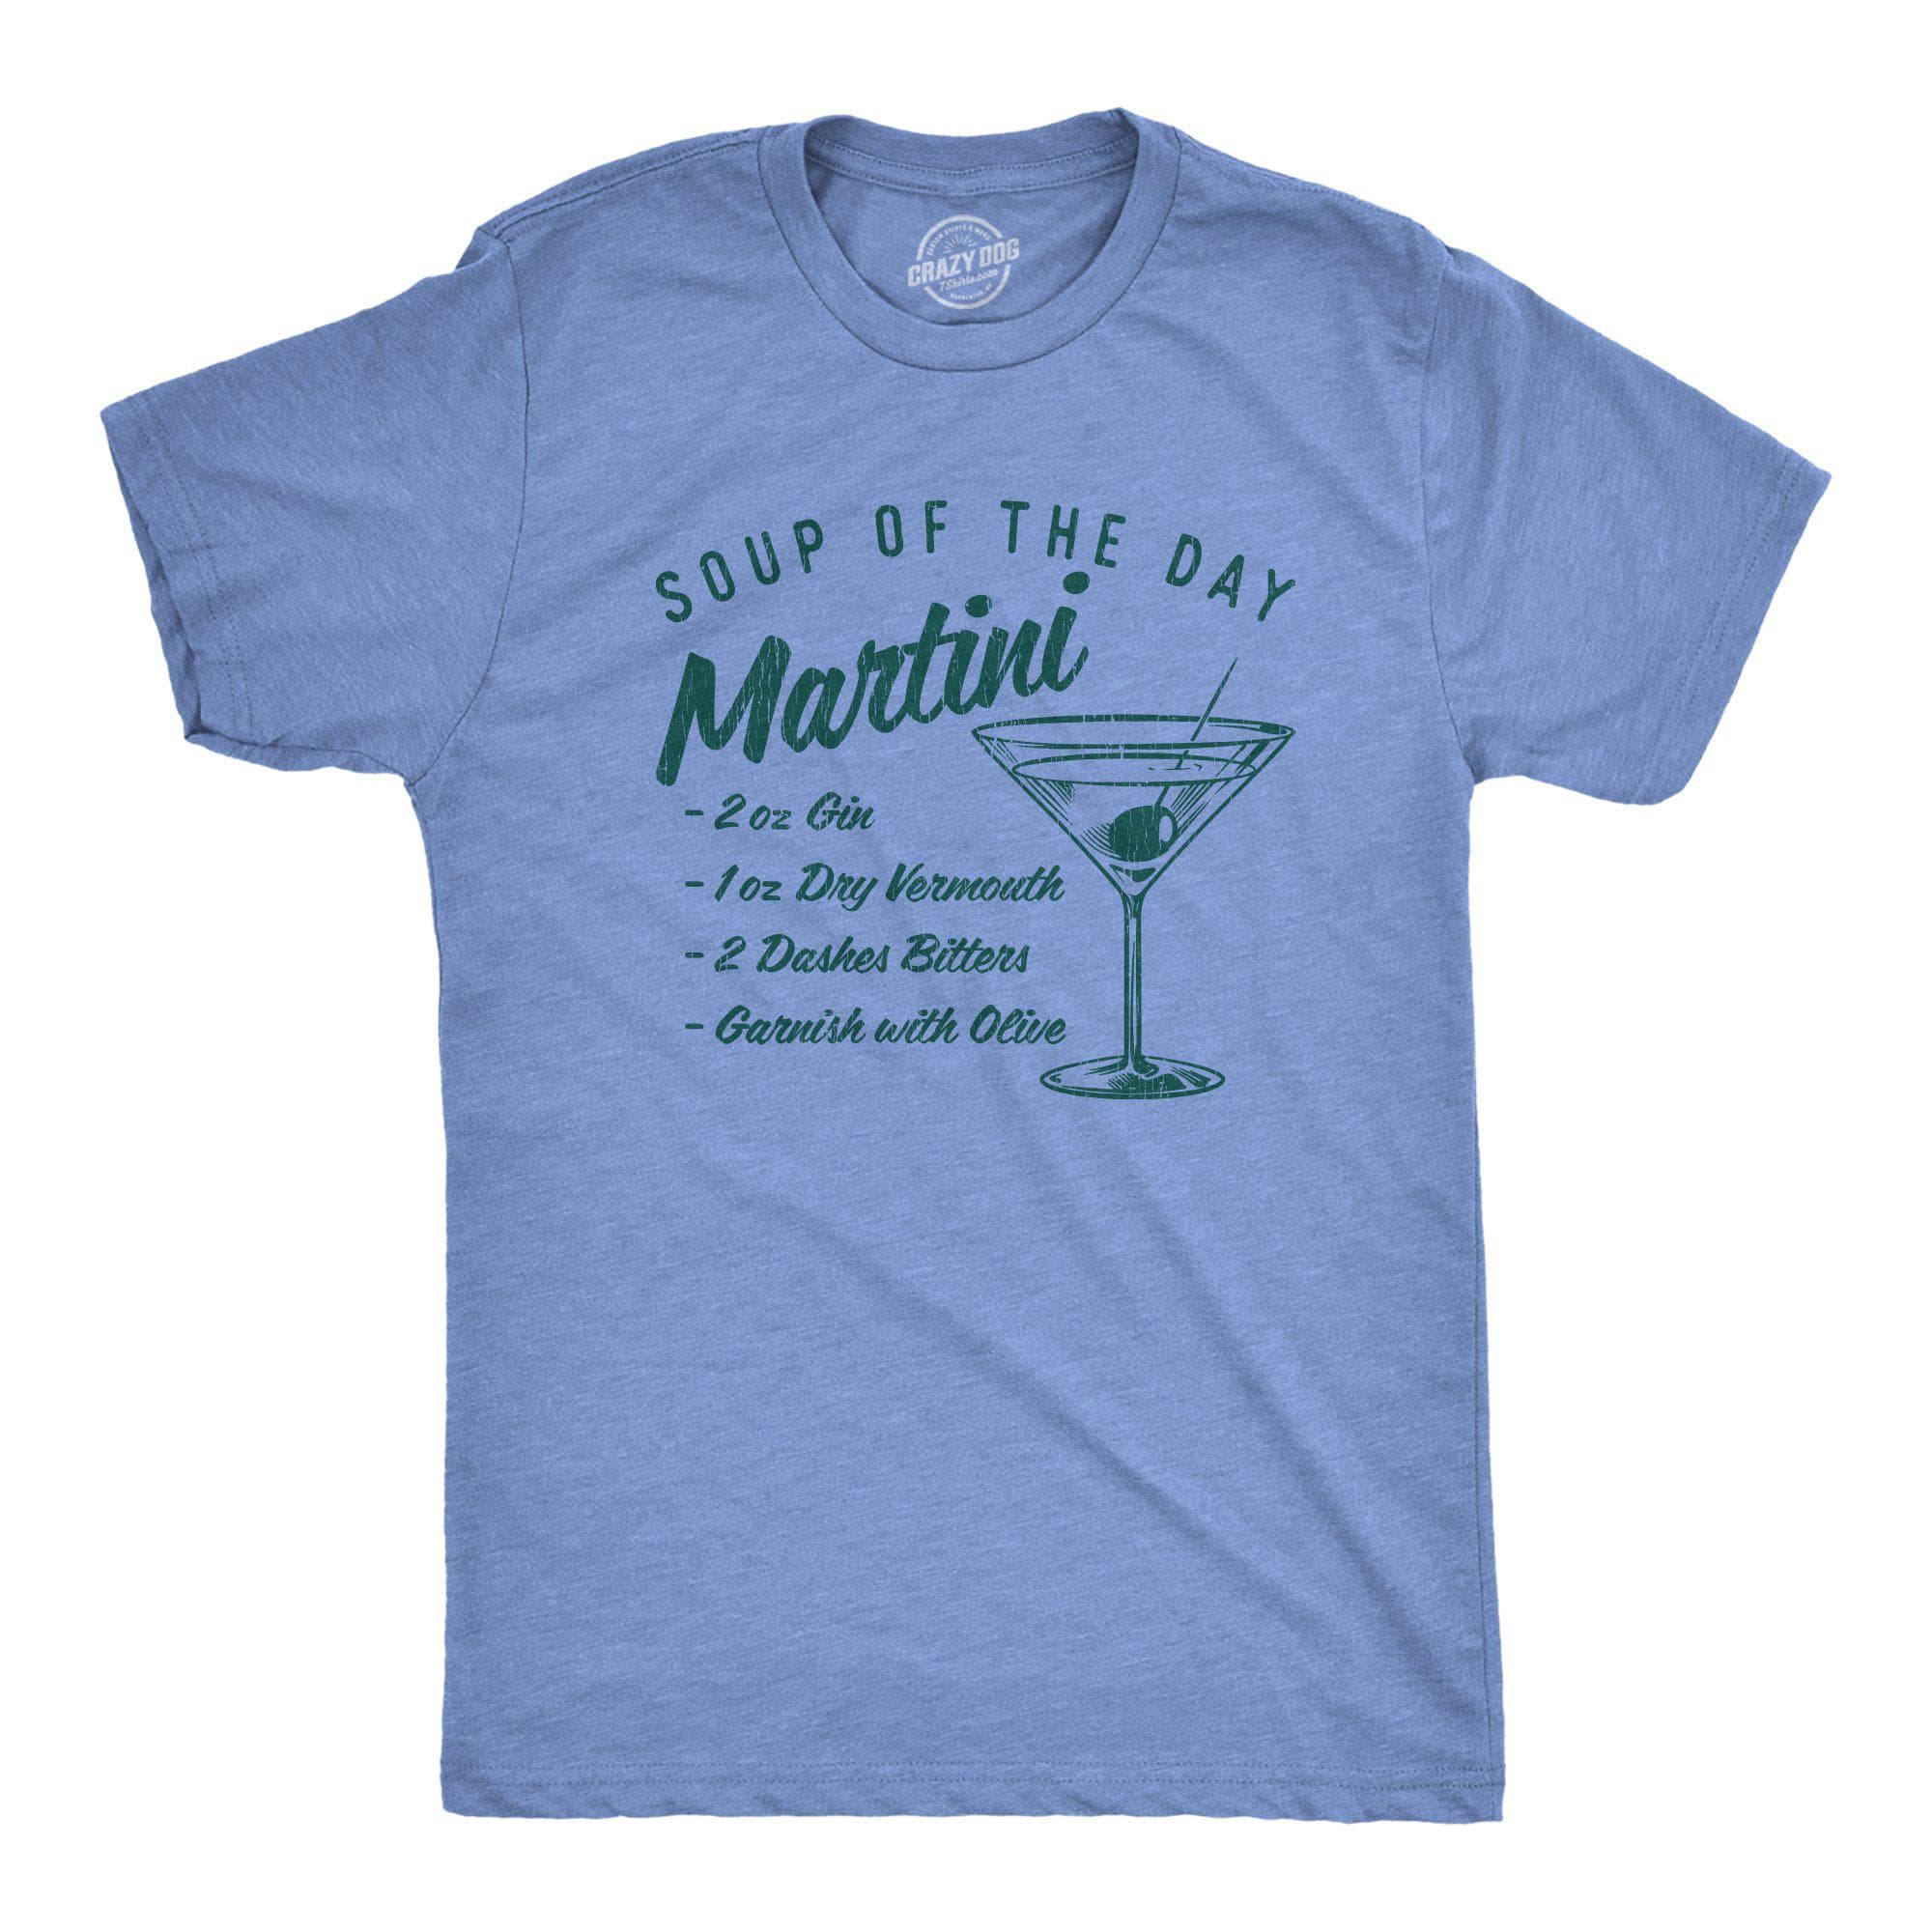 Soup Of The Day Martini Men's Tshirt - Crazy Dog T-Shirts